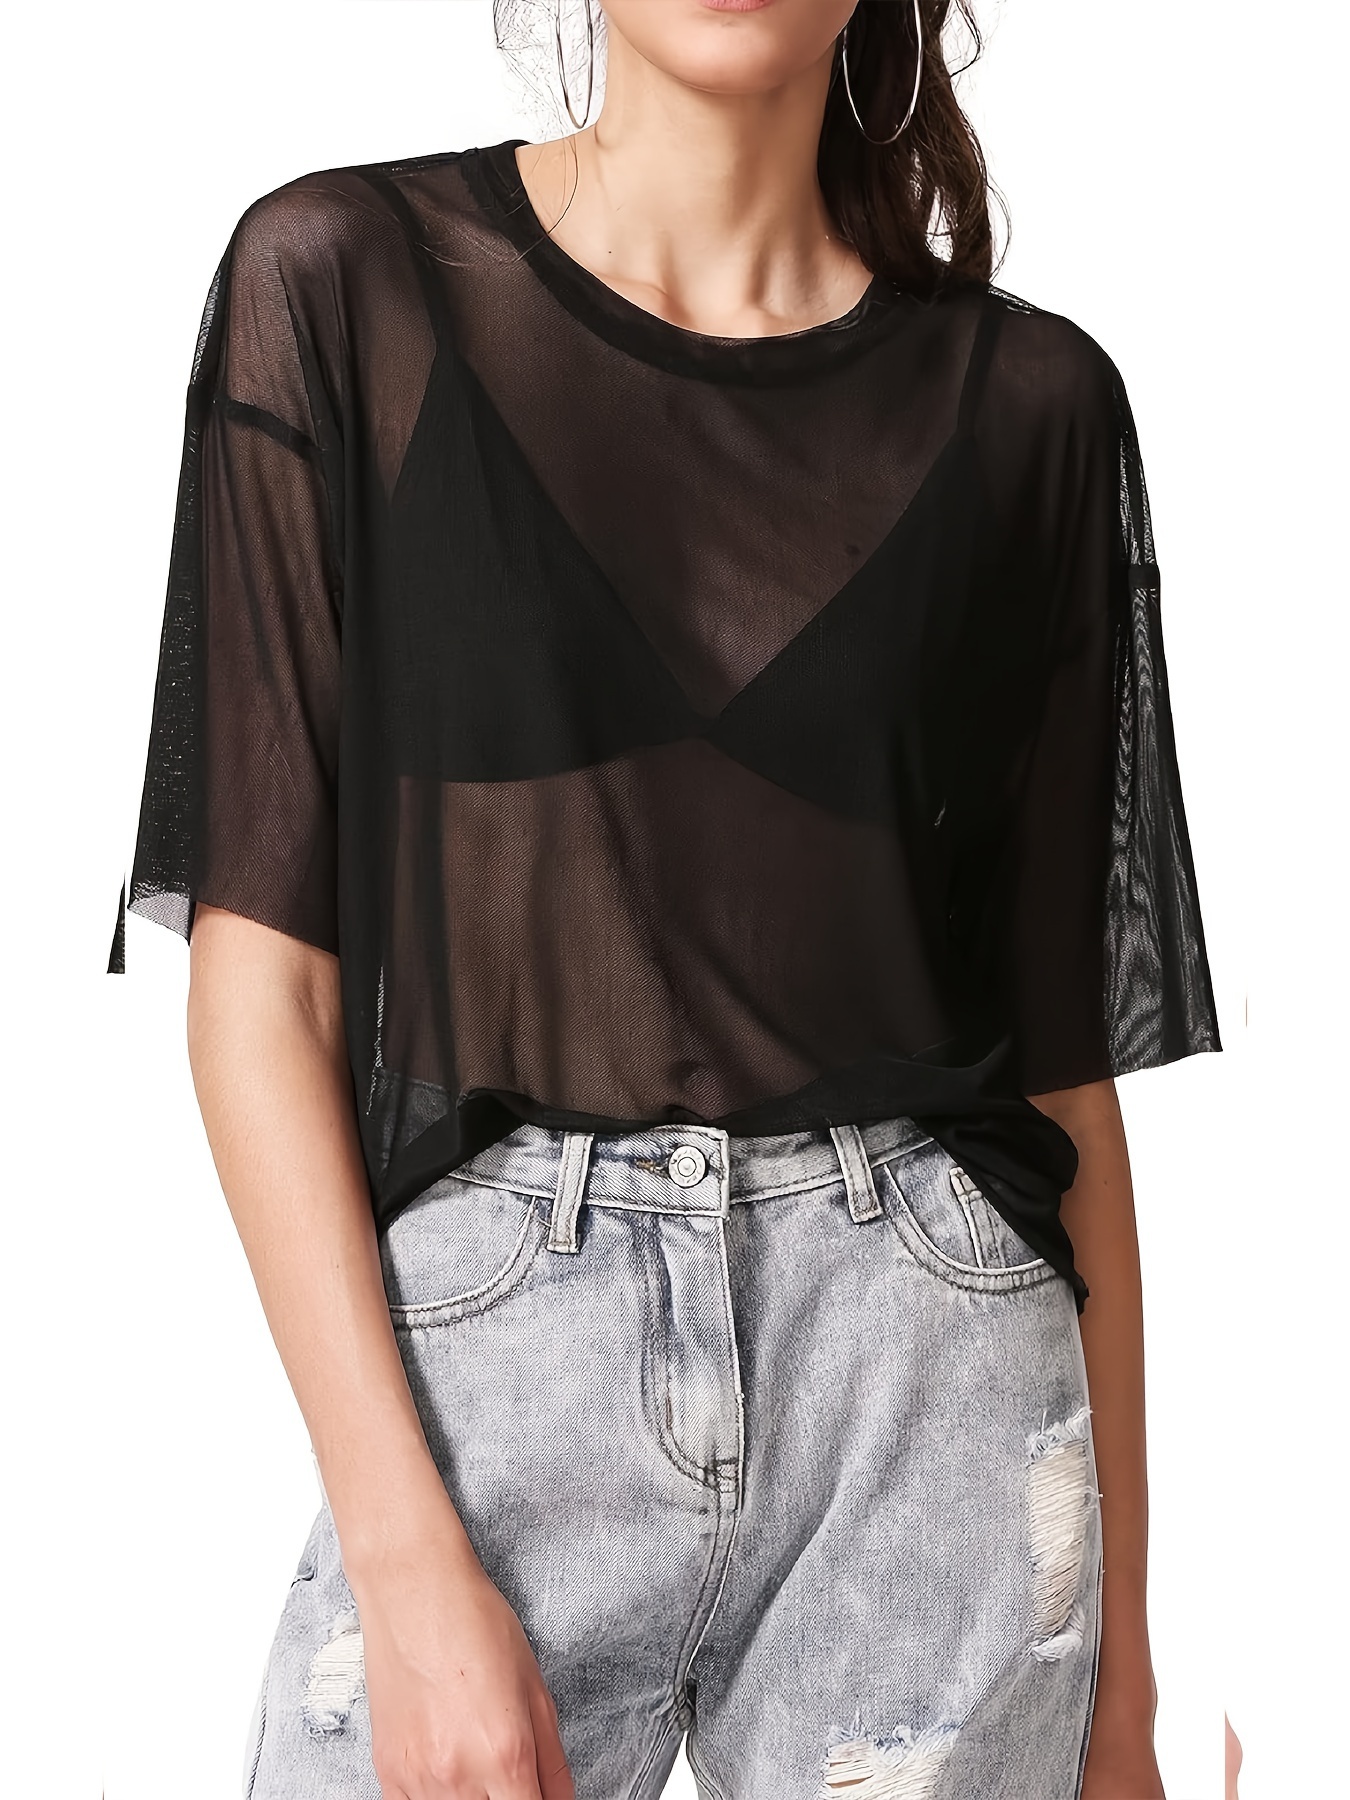 Sheer Mesh Sexy Crop Top Without Bra, Short Sleeve Casual Every Day Top For  Summer, Women's Clothing